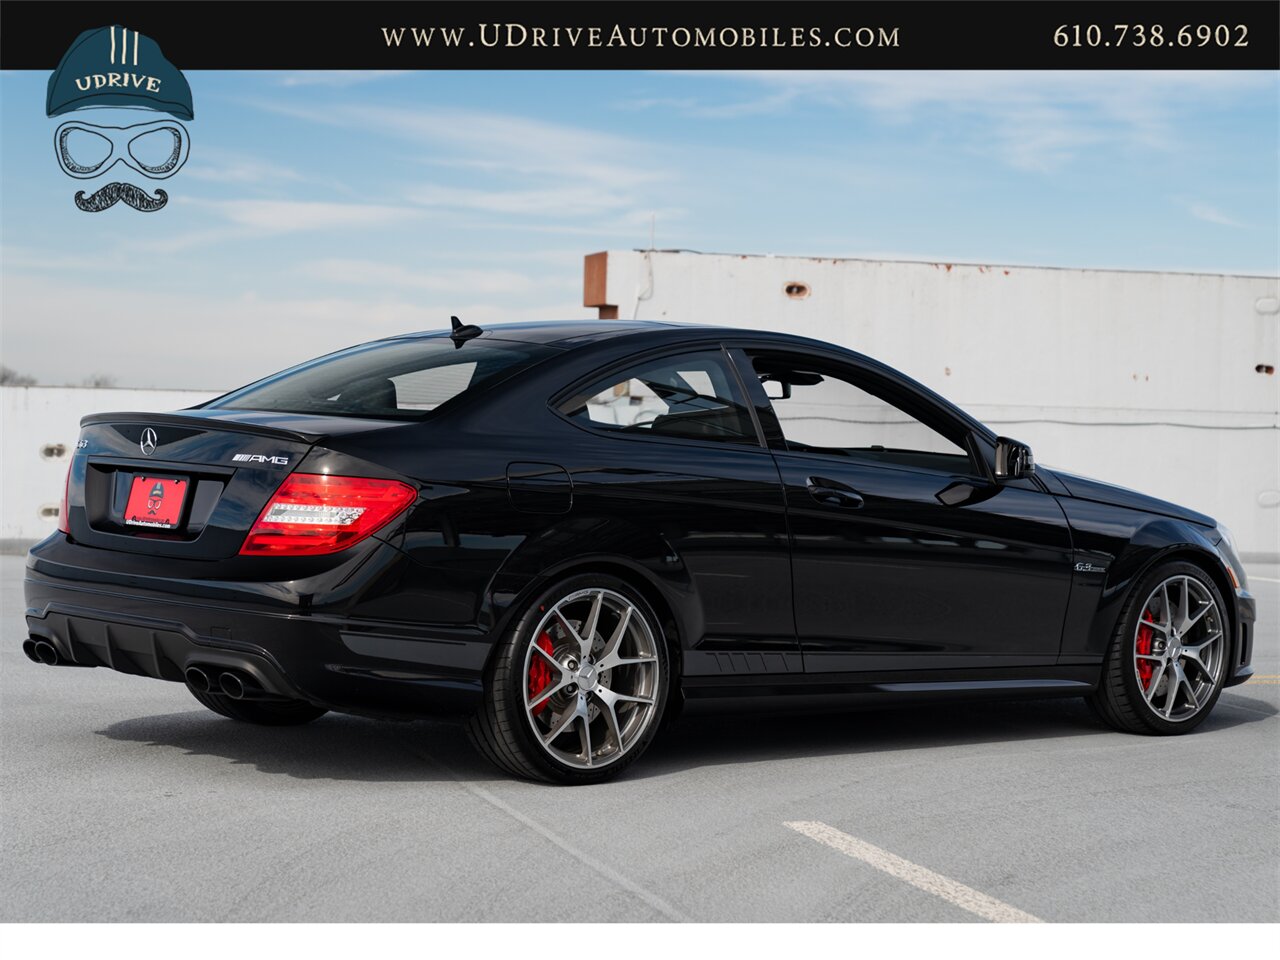 2015 Mercedes-Benz C63 AMG  Edition 507 17k Miles Pano Sunroof Locking Diff 507hp - Photo 19 - West Chester, PA 19382